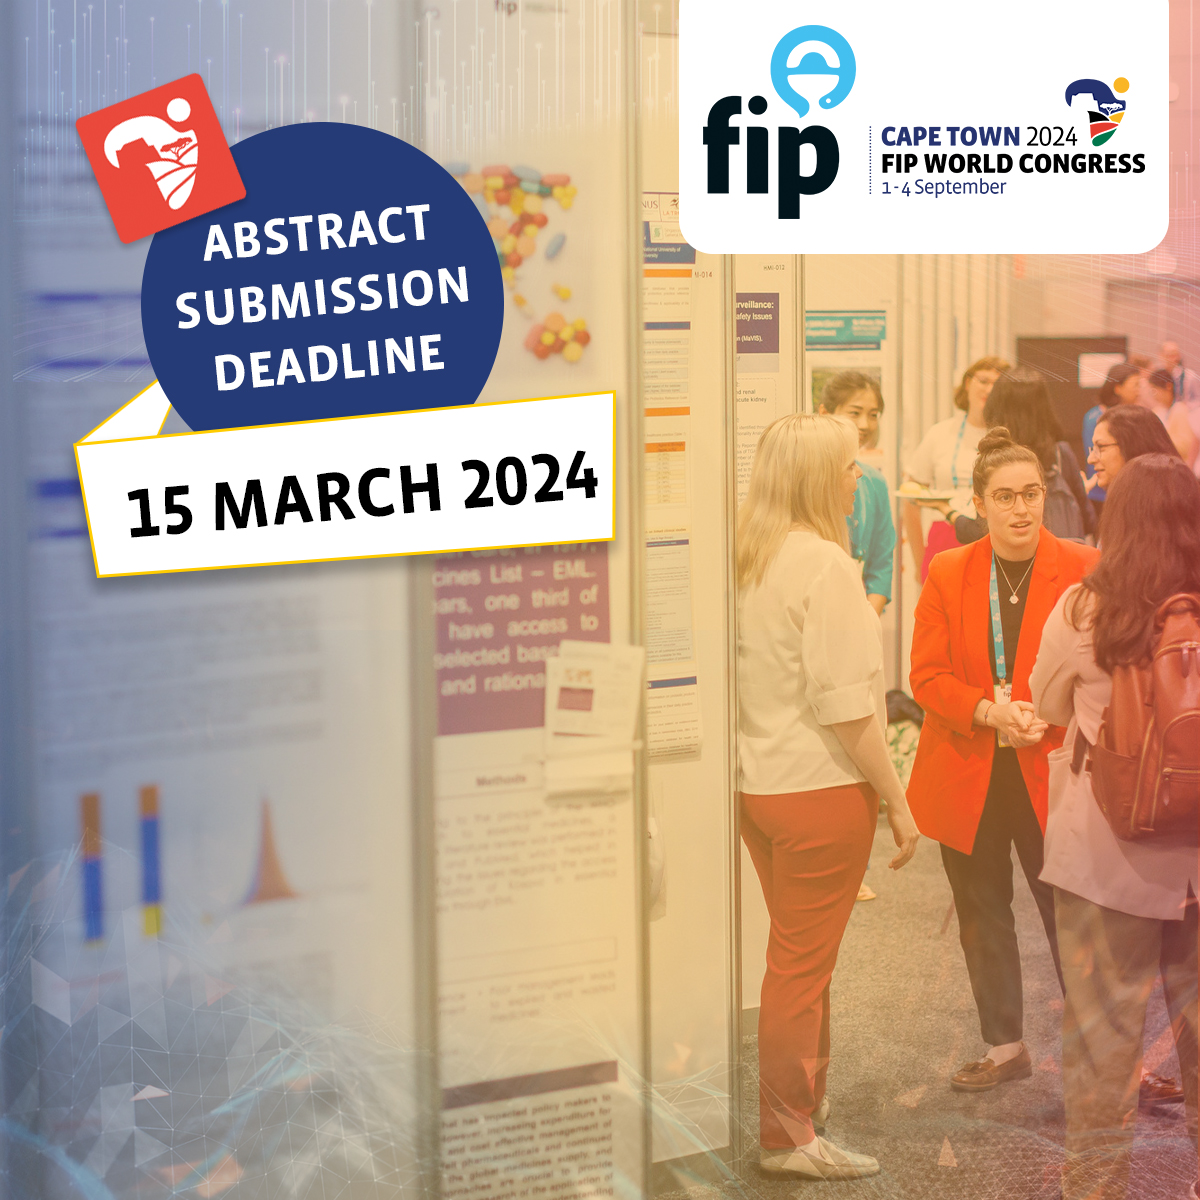 Only a few hours left until the abstract submission deadline! Don't miss your chance to join us at the 82nd #FIPCongress in Cape Town, South Africa. Submit your abstract now for maximum exposure to the world of pharmaceutical innovation. capetown2024.fip.org/programme/call….